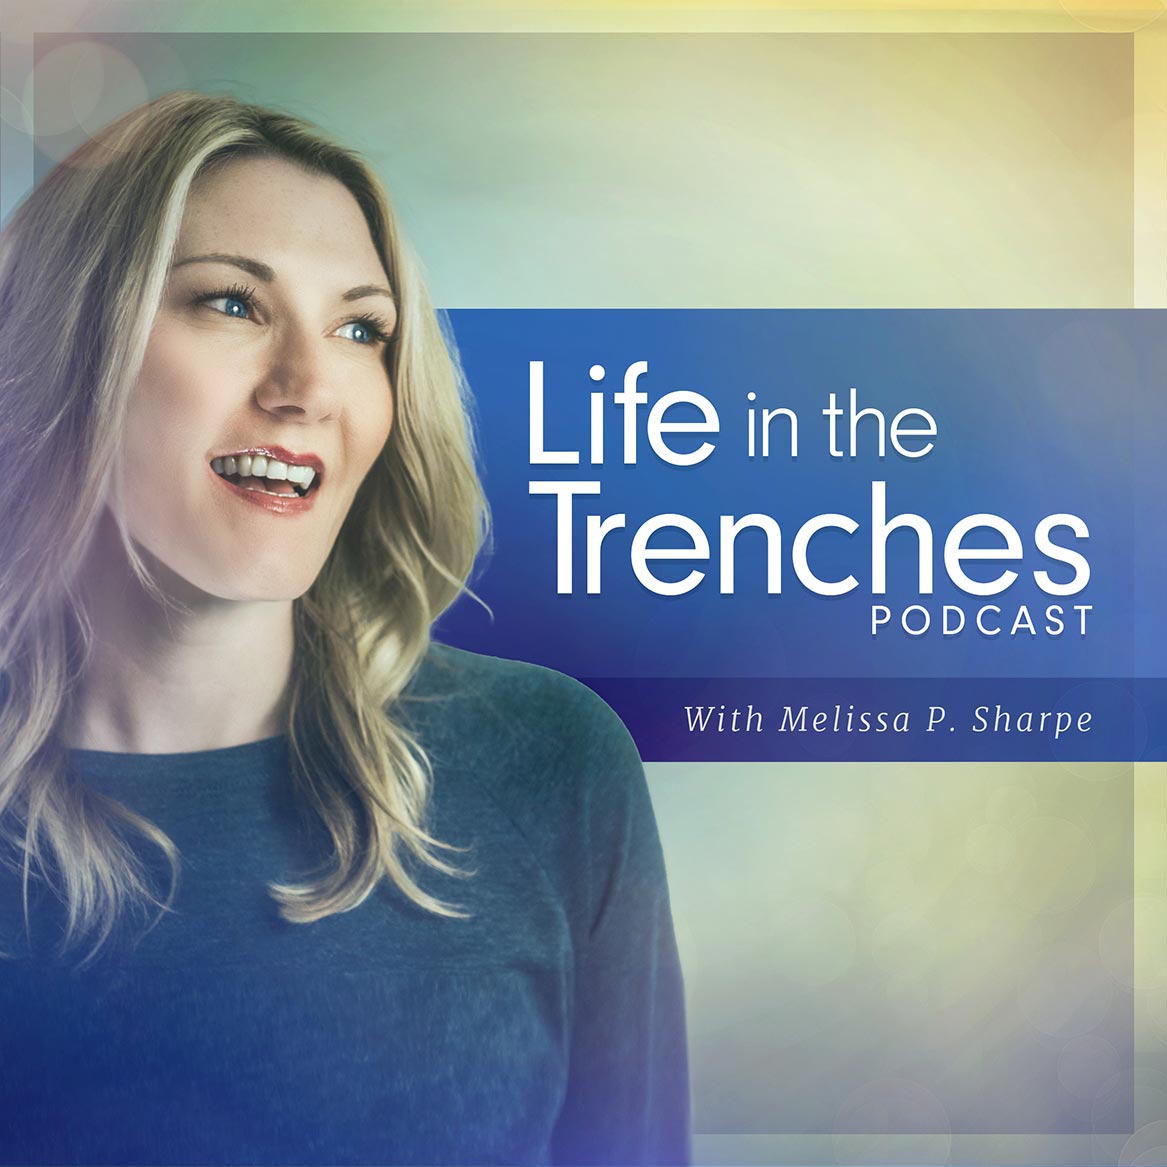 Life in the Trenches Podcast